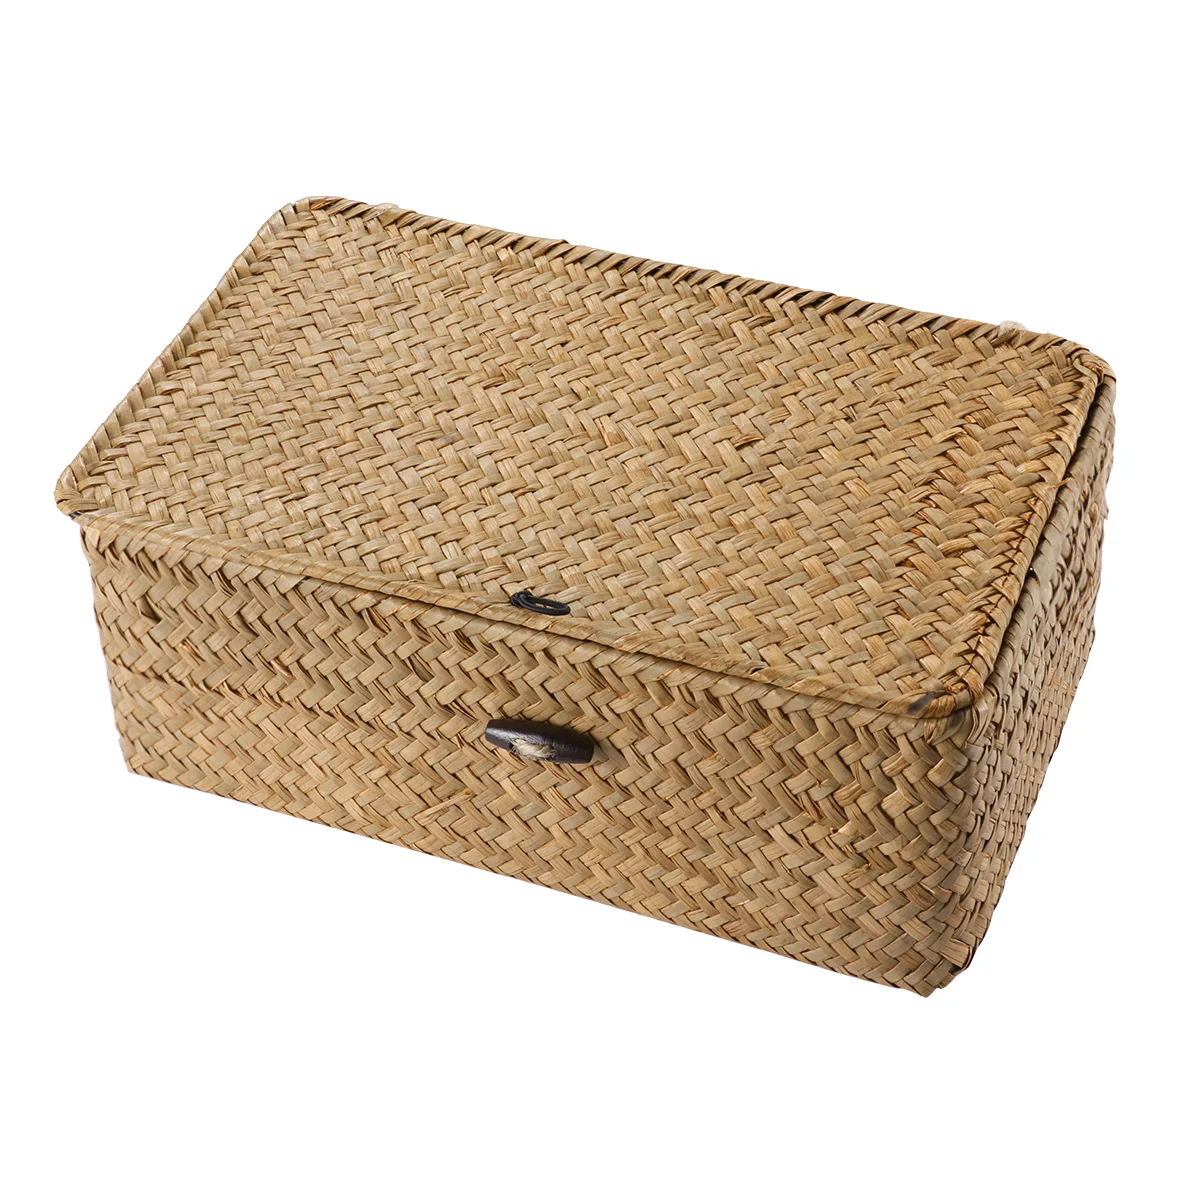 

Storage Basket Woven Baskets With For Box Seaweed Boxes Lid Rattan Desktop Decorative Organizing Lids Straw Small Table